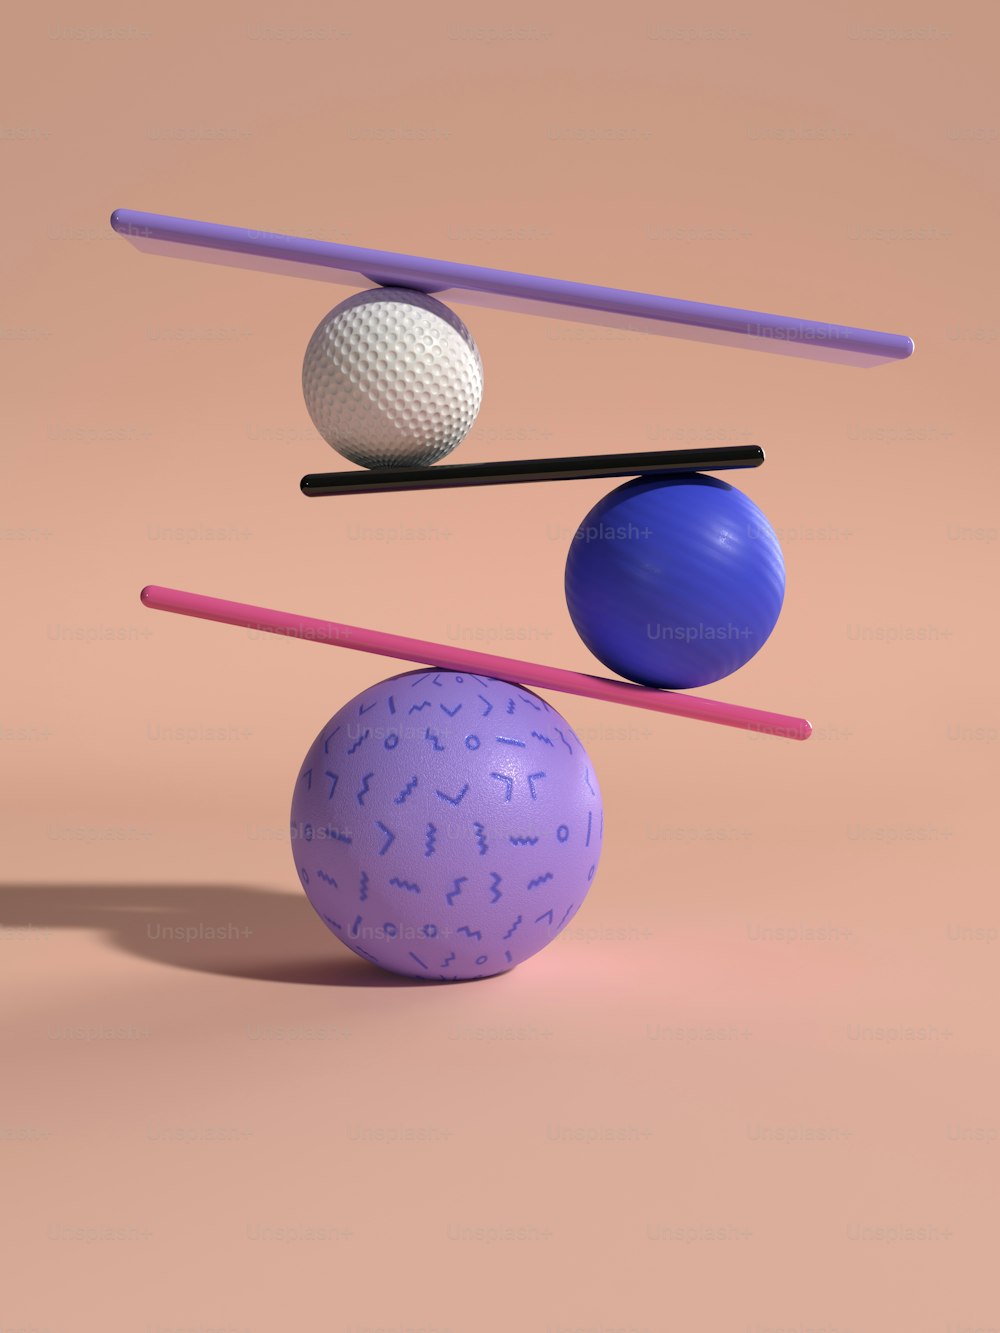 a group of three balls sitting on top of each other